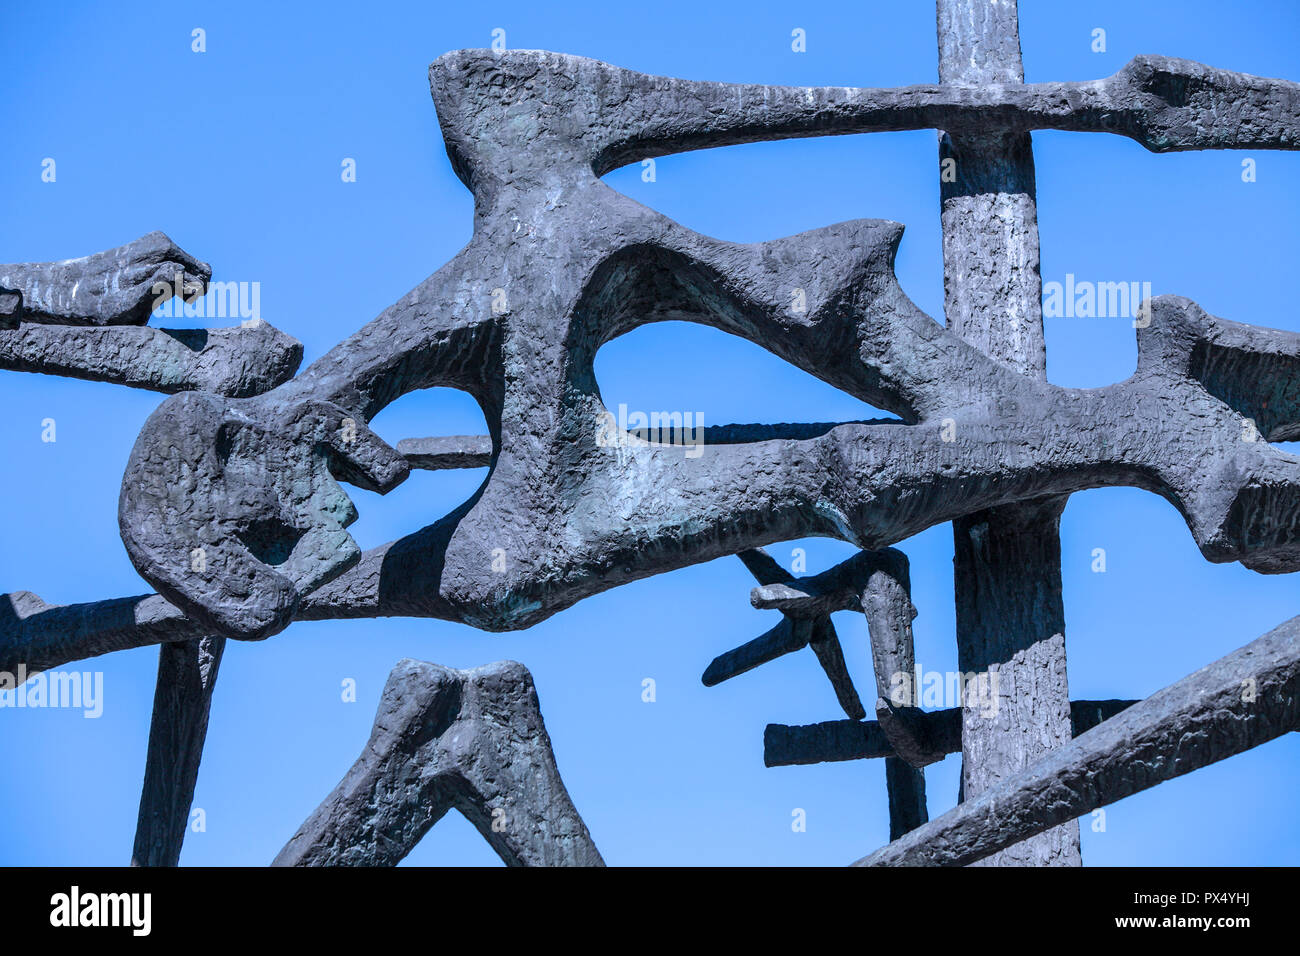 Sculptures and Memorials to those who suffered inhumane treatment within the confines of Dachau Concentration Camp in Germany of which many were Jews. Stock Photo